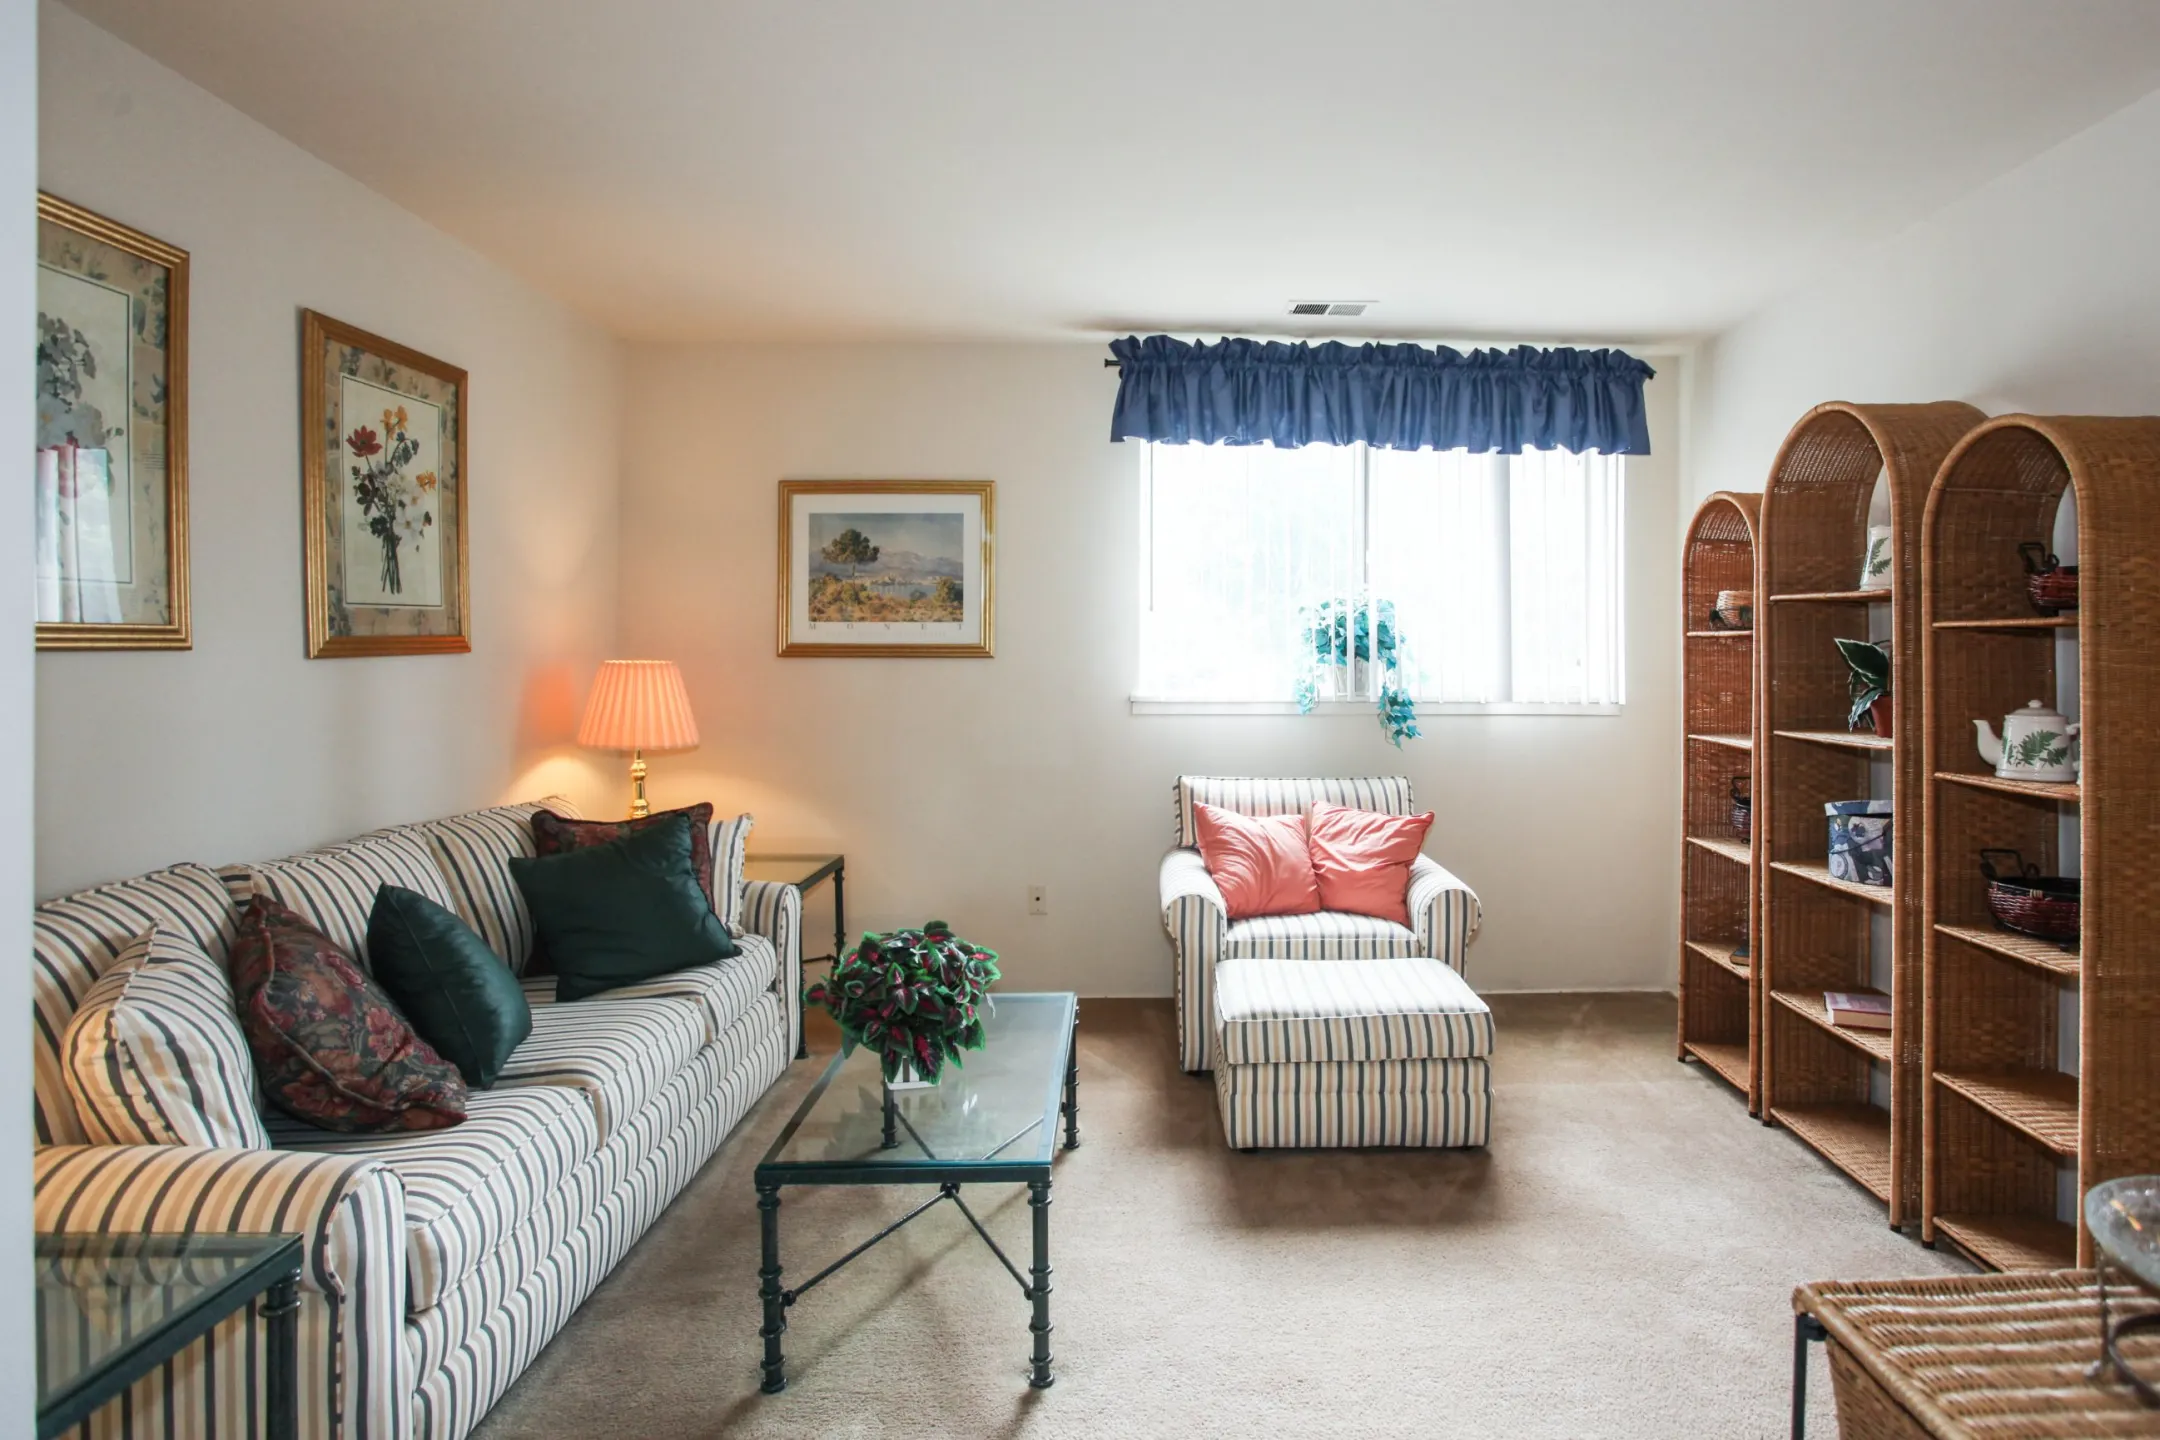 Living Room - Gardenvillage Apartments & Townhouses - Baltimore, MD